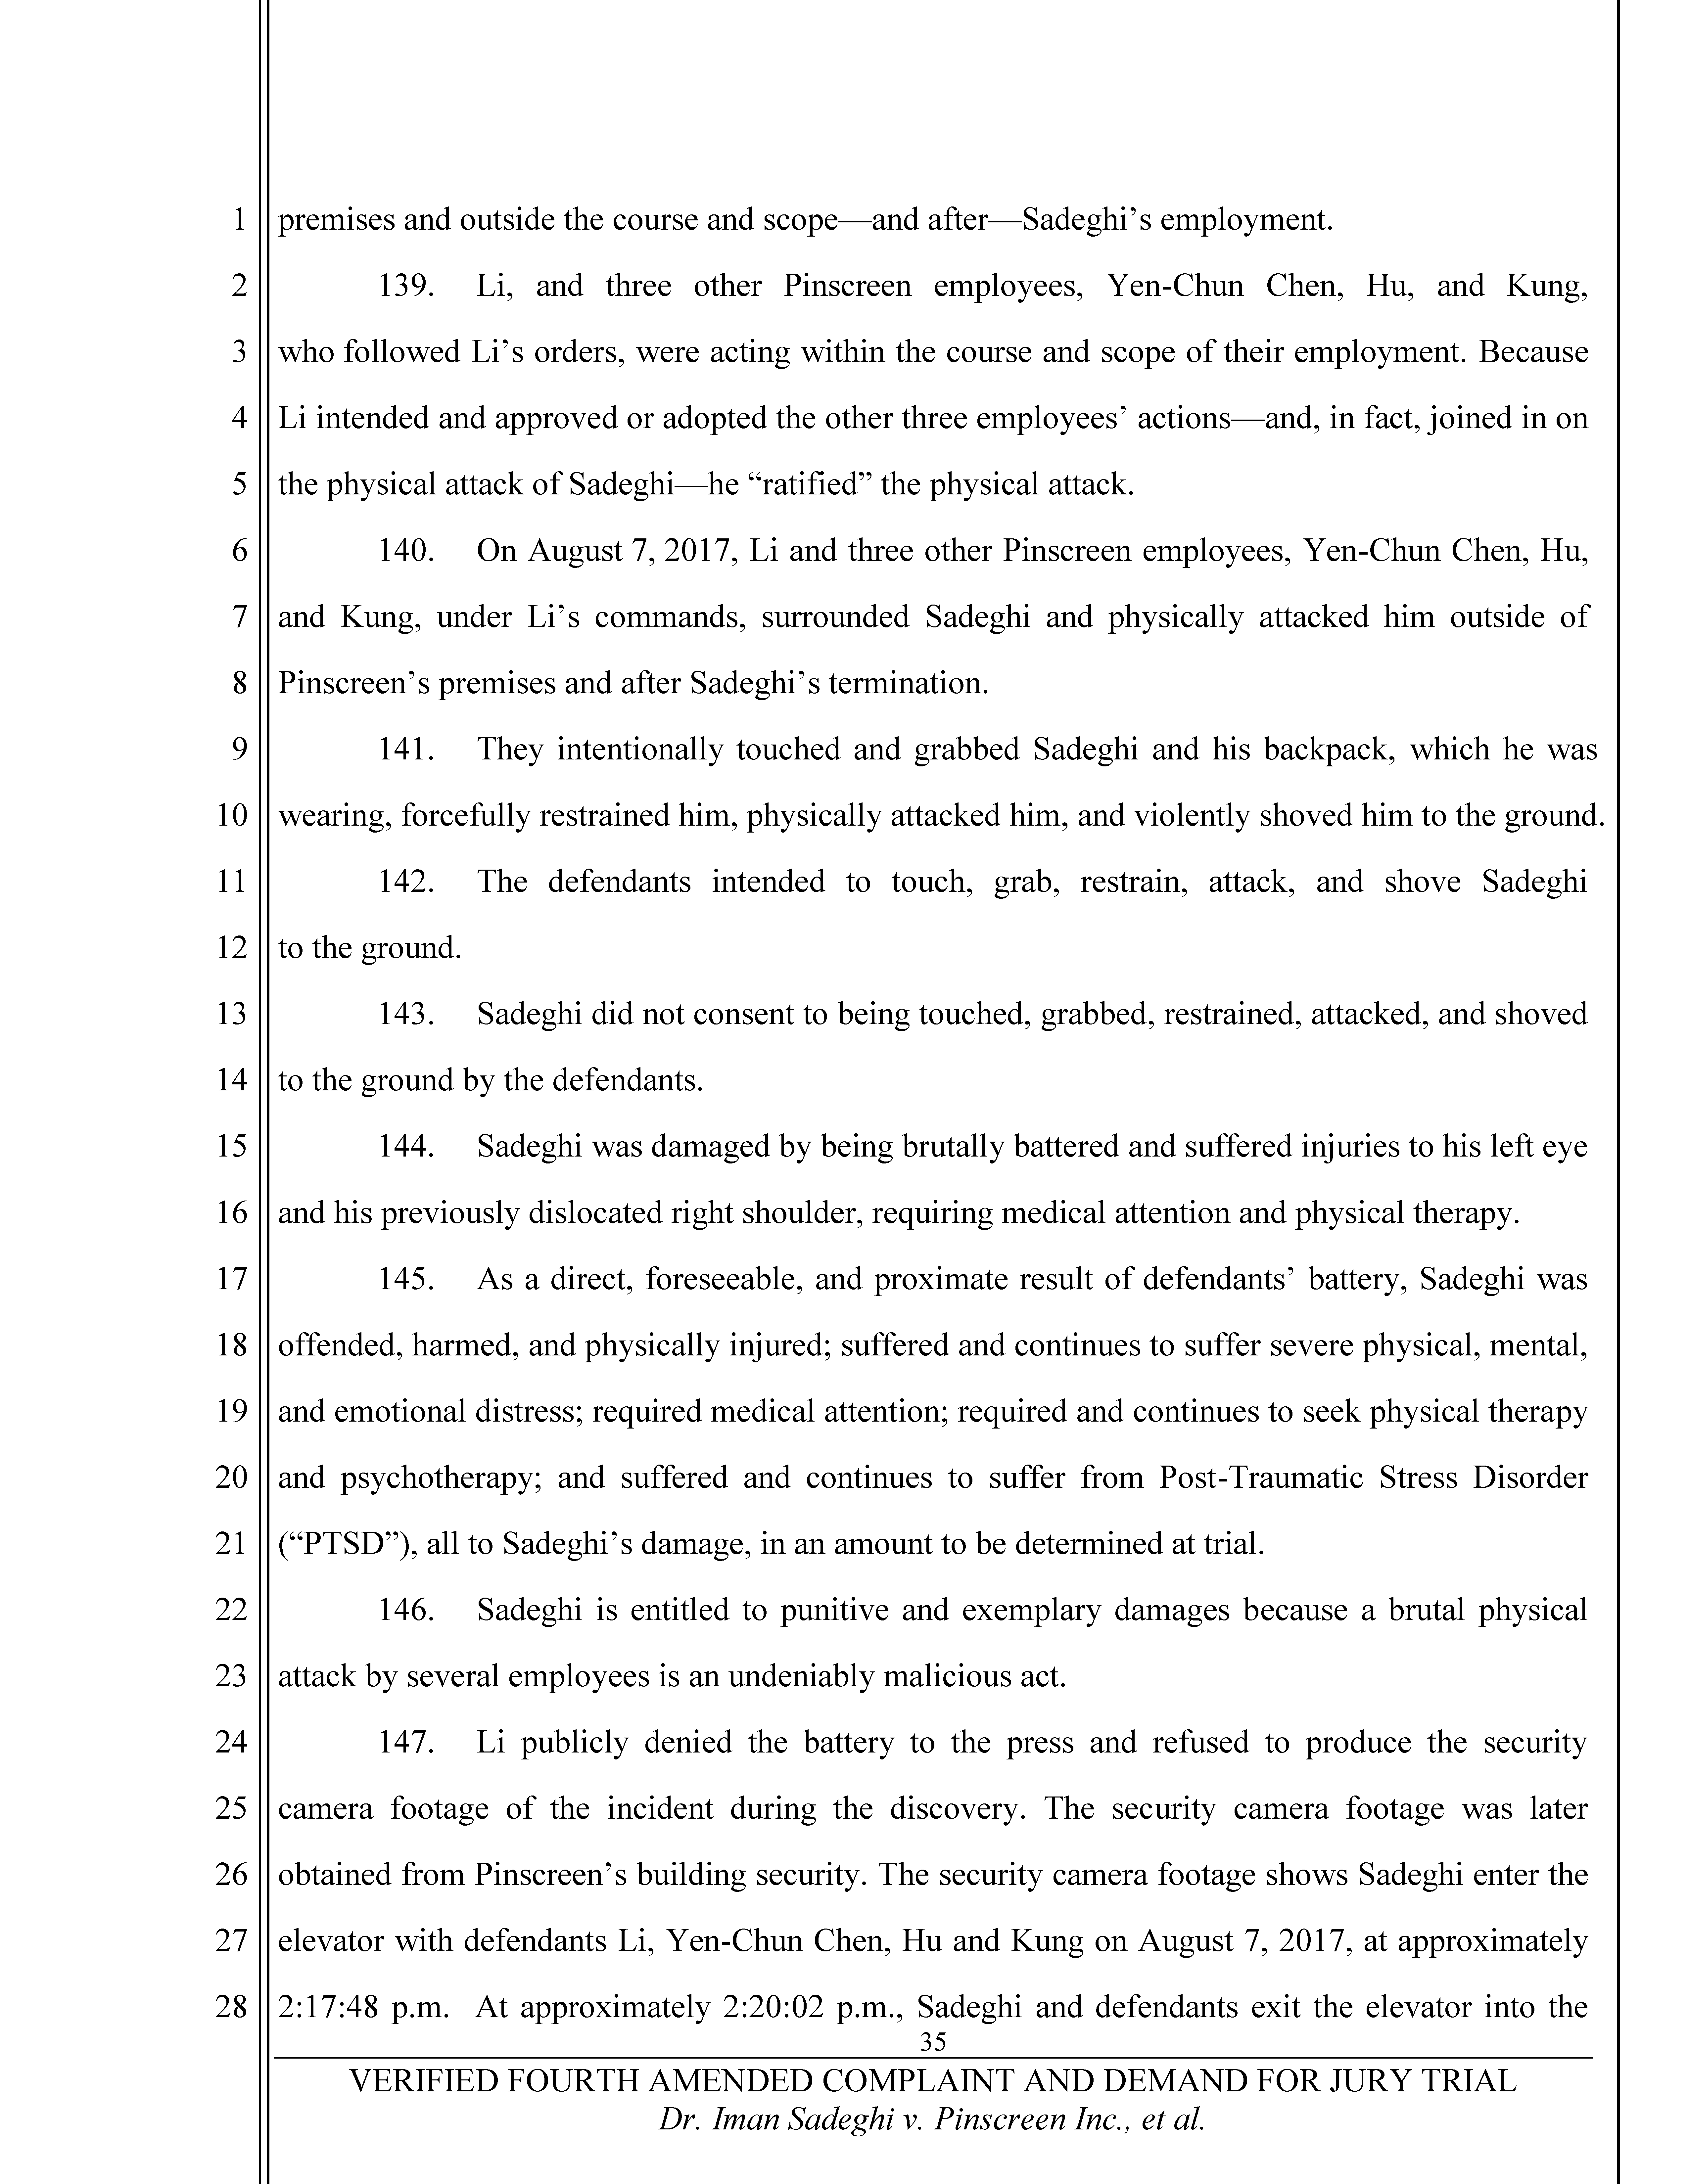 Fourth Amended Complaint (4AC) Page 36